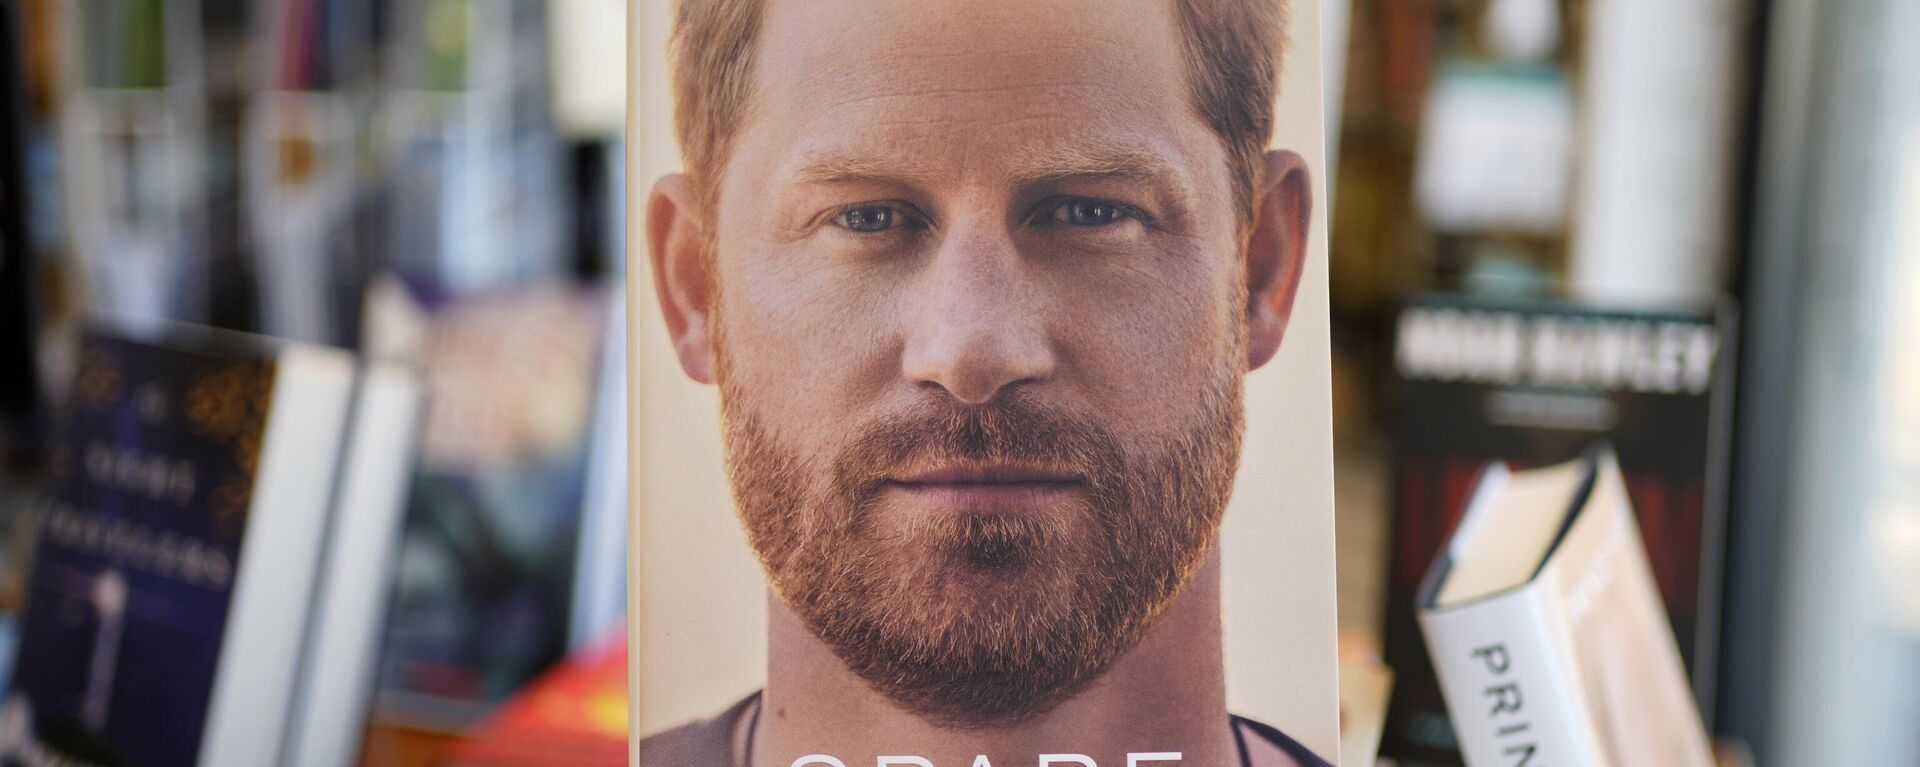 Copies of the new book by Prince Harry called Spare are displayed at Sherman's book store in Freeport, Maine, Tuesday, Jan. 10, 2023. - Sputnik International, 1920, 13.01.2023